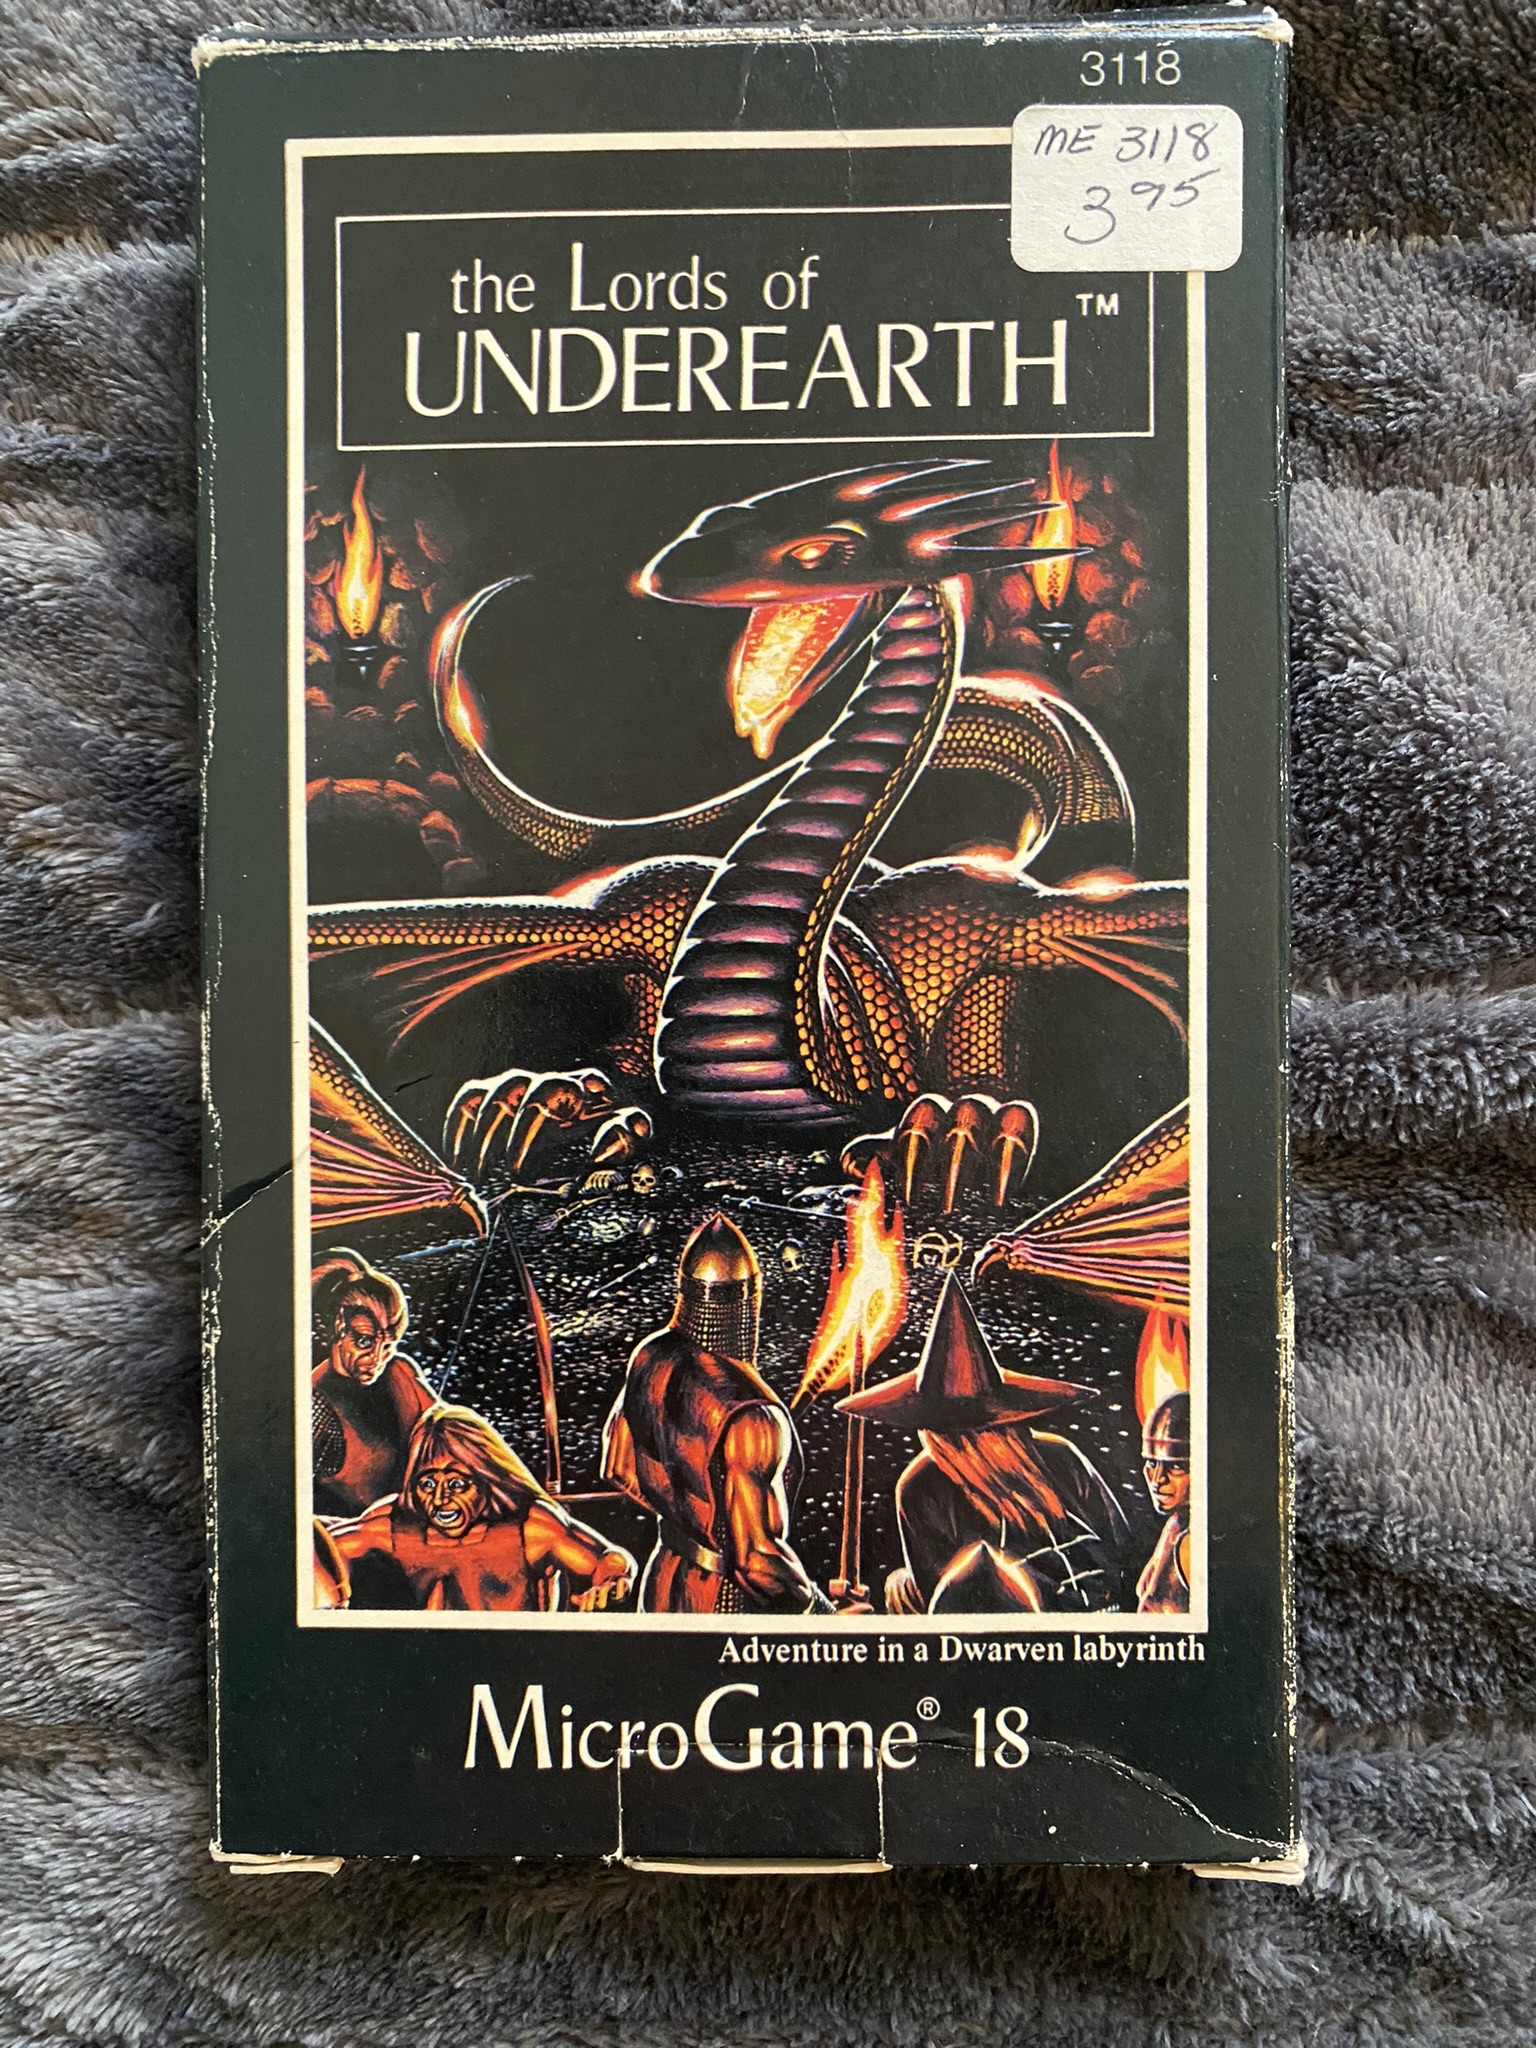 The Lords of Underearth, front cover